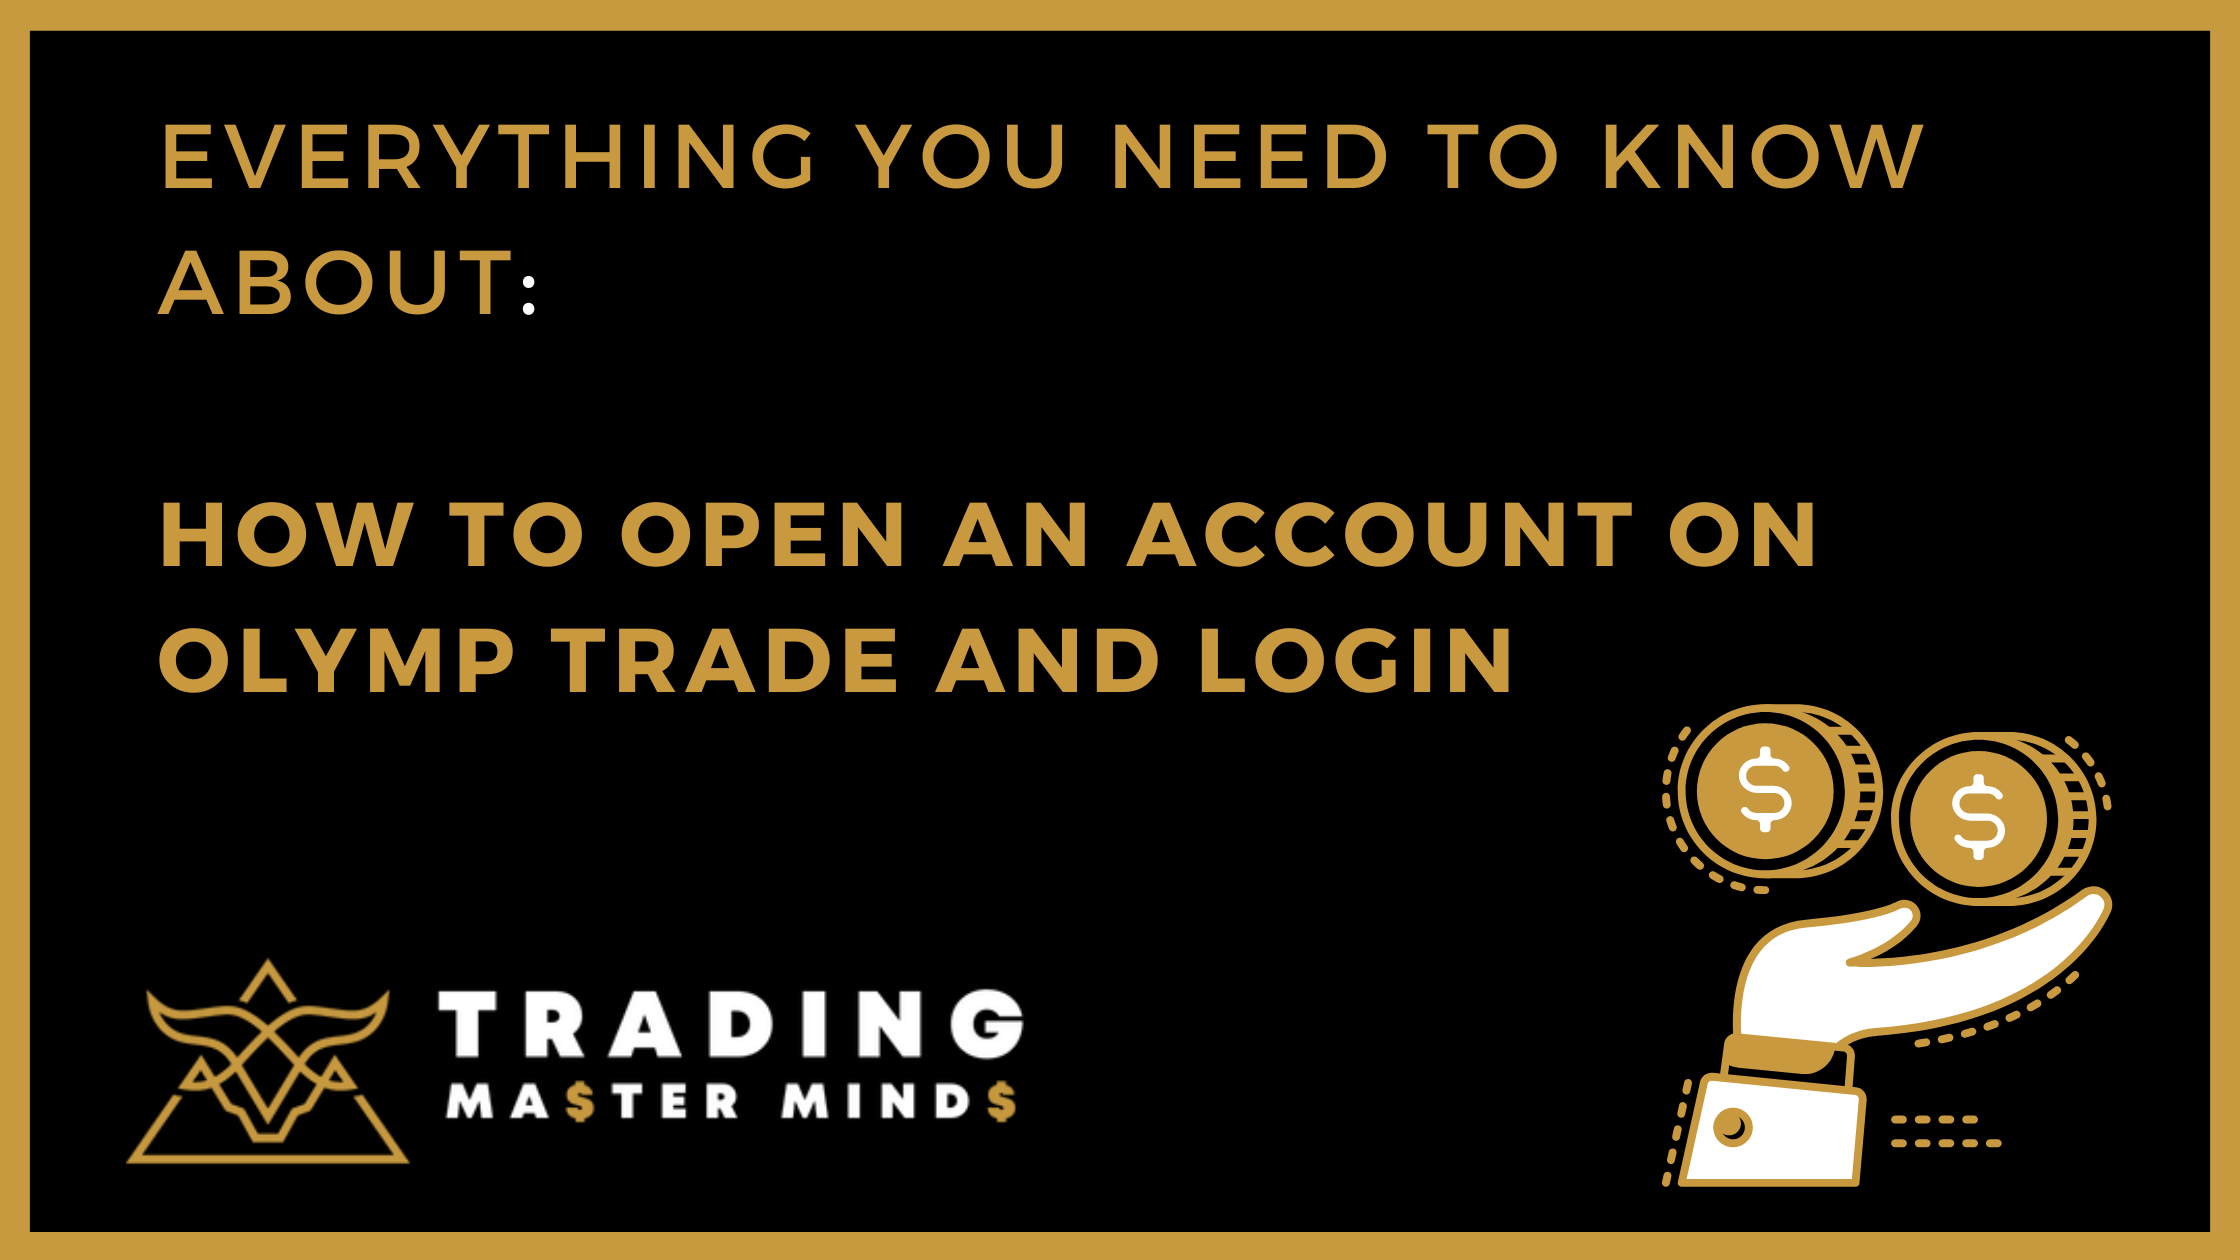 EVERYTHING YOU NEED TO KNOW ABOUT HOW TO OPEN AN ACCOUNT ON OLYMP TRADE AND LOGIN